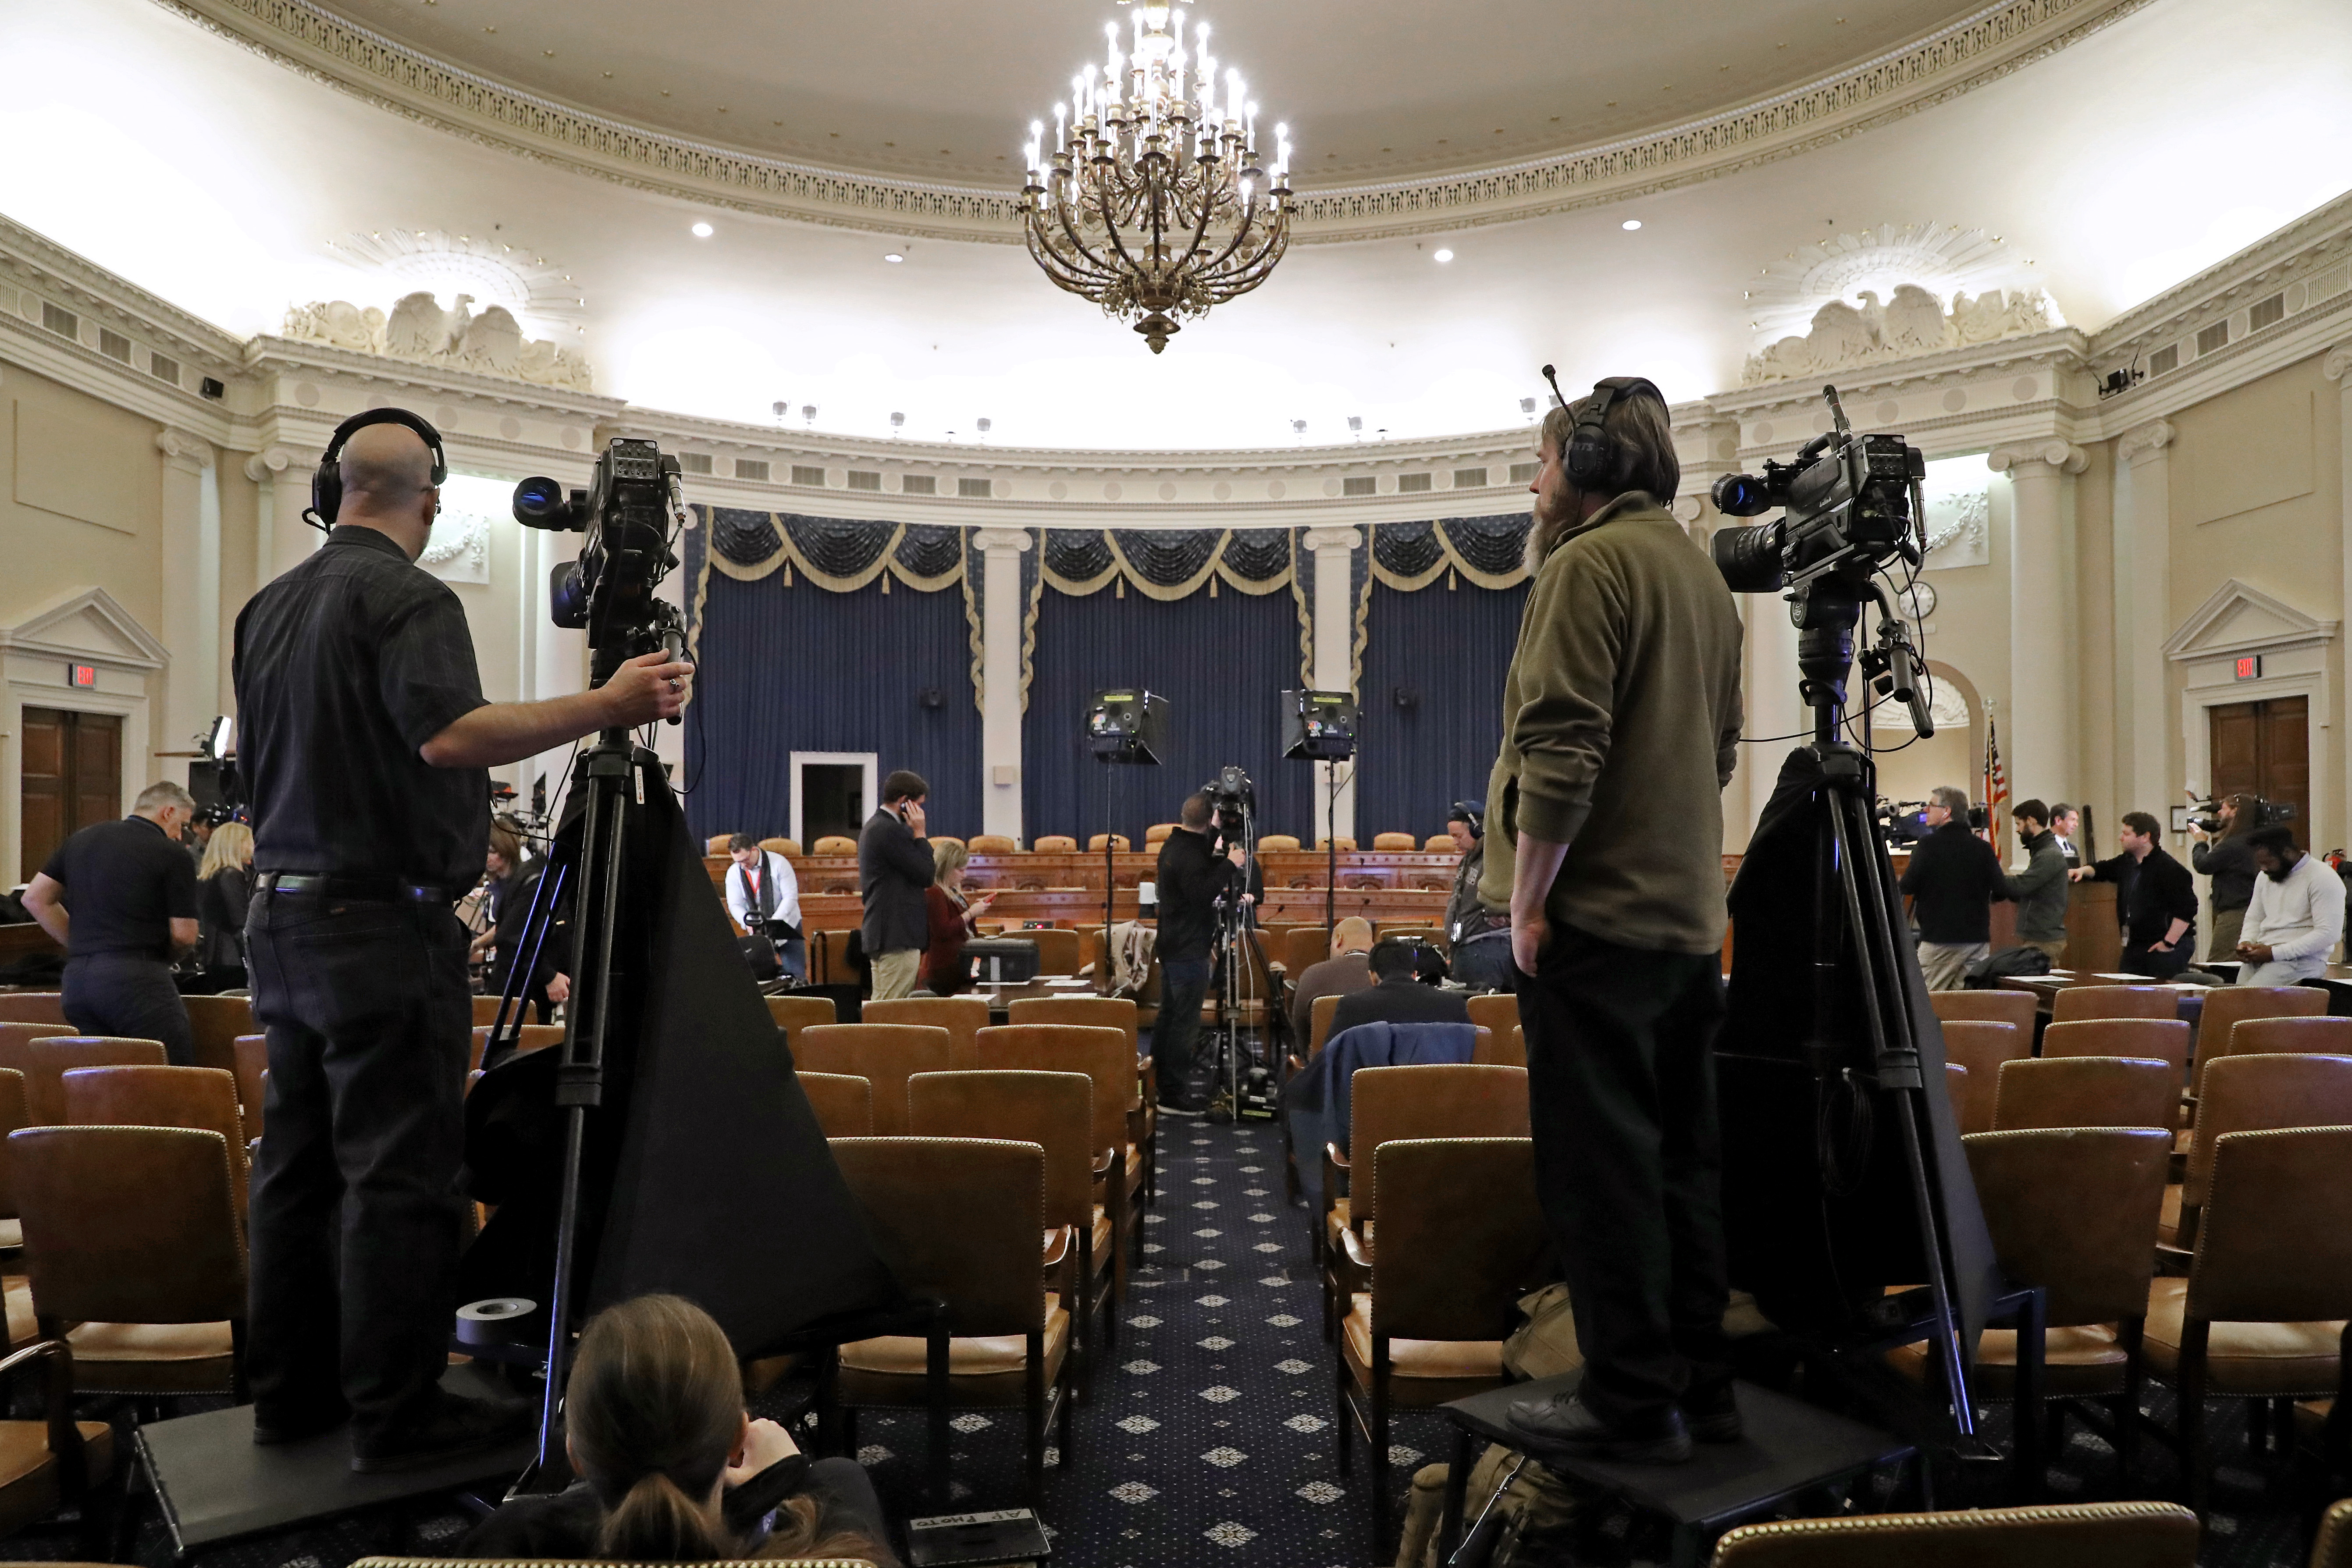 Journalists and camera crews report from inside the hearing room where the House Intelligence Committee will hold its first public impeachment hearing (Photo by Chip Somodevilla/Getty Images)